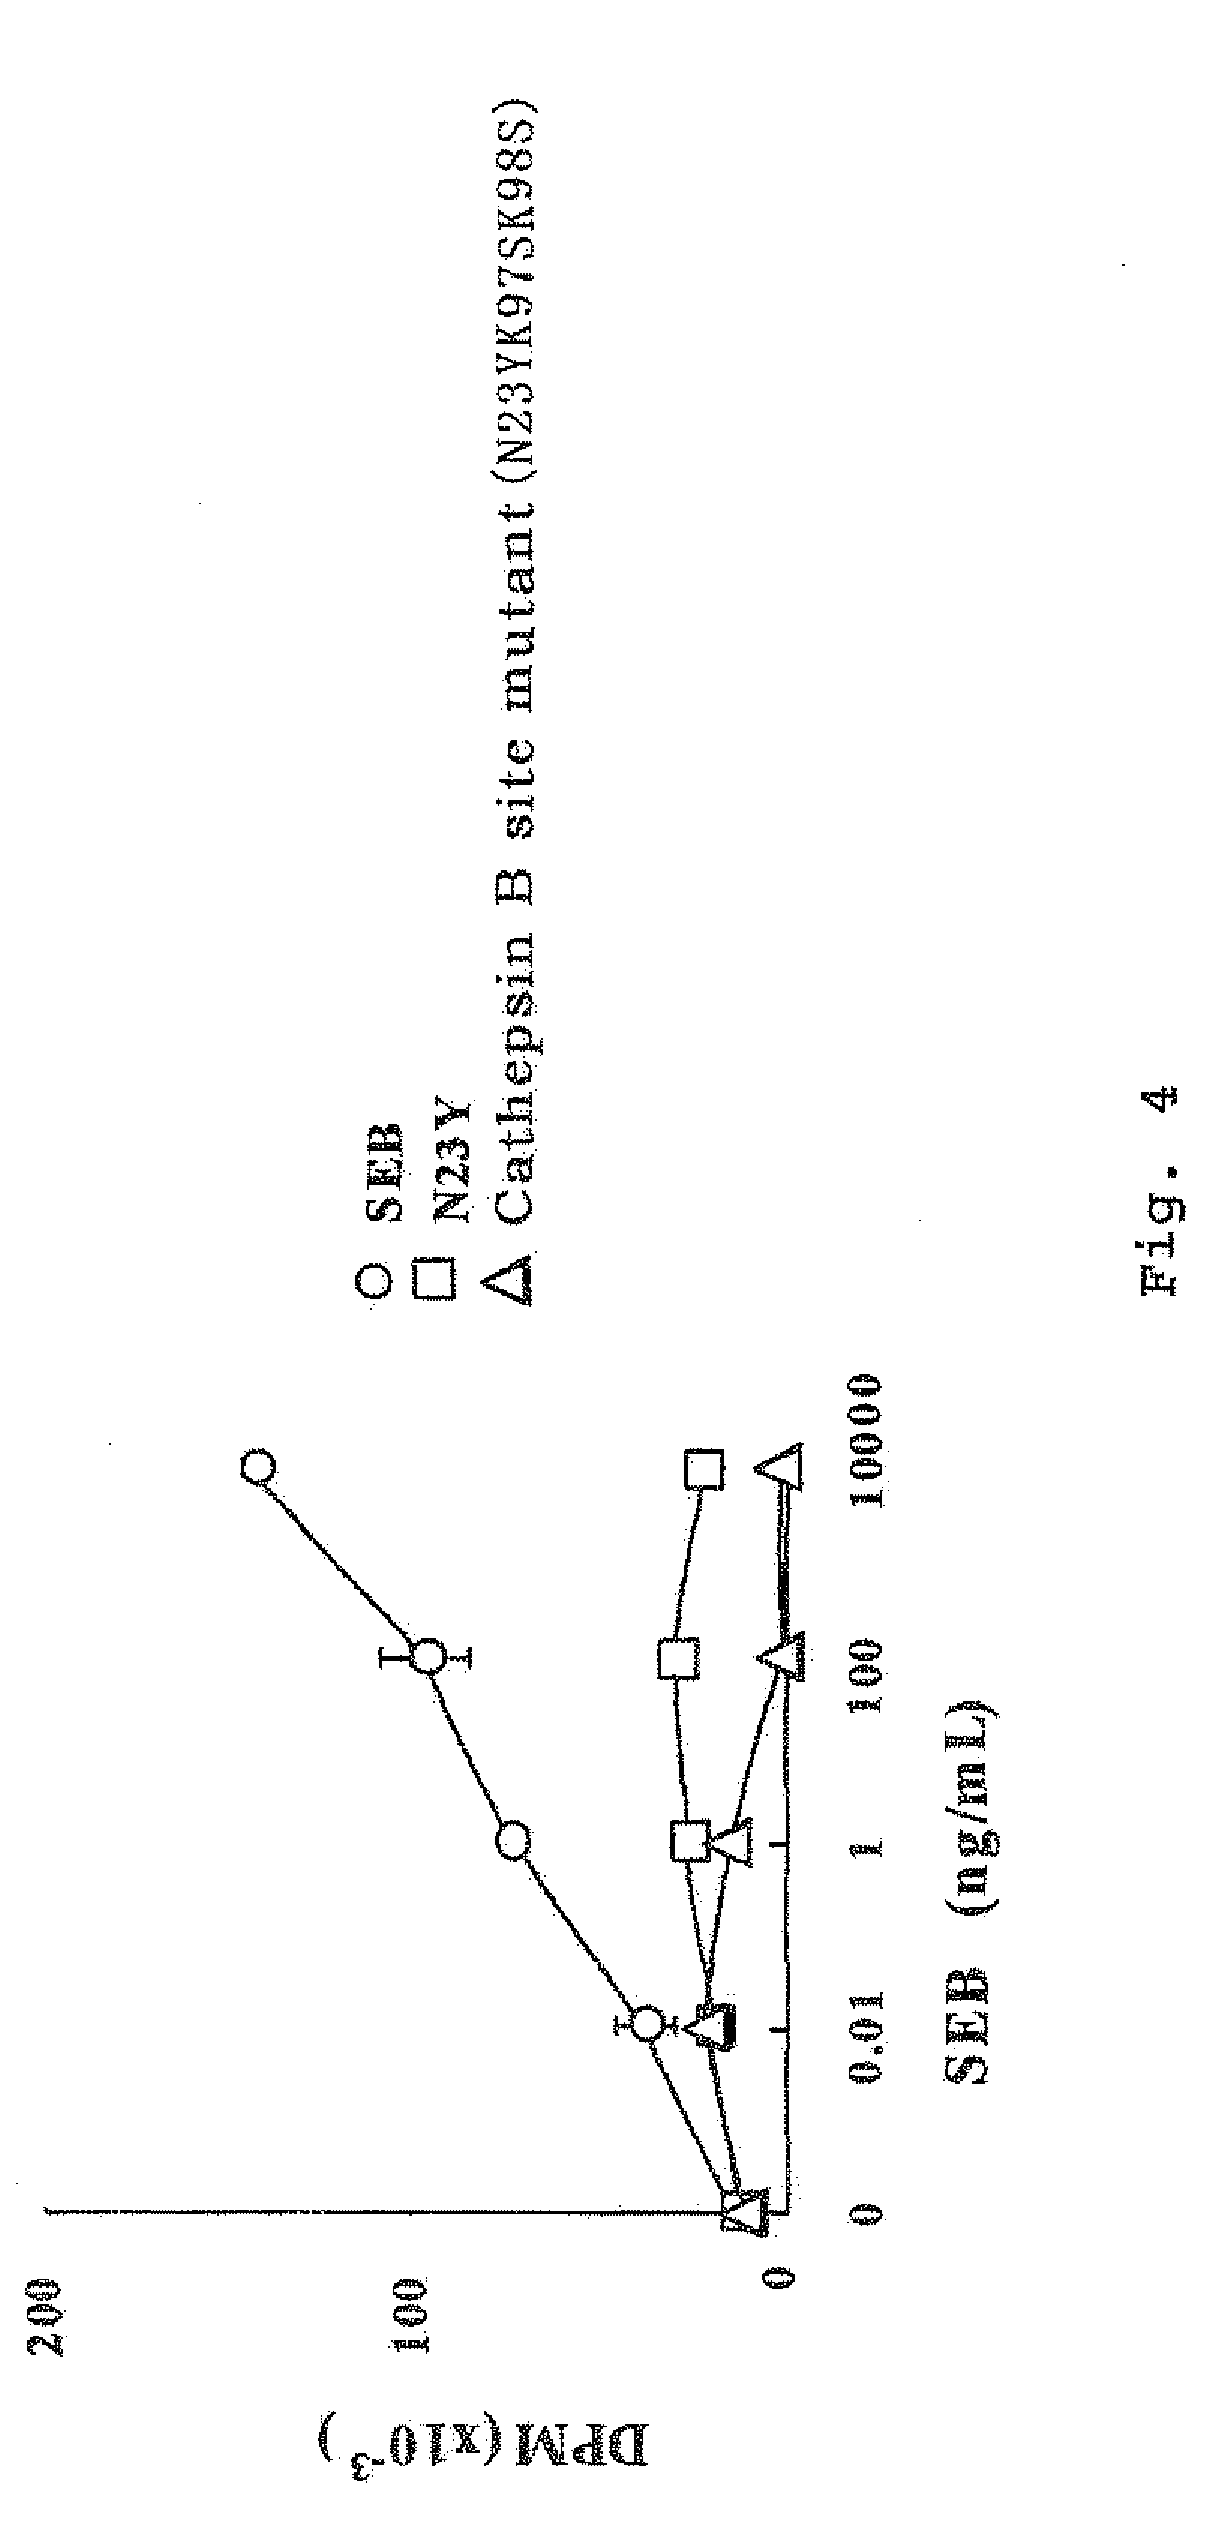 Protease-resistant modified seb and vaccine containing the same